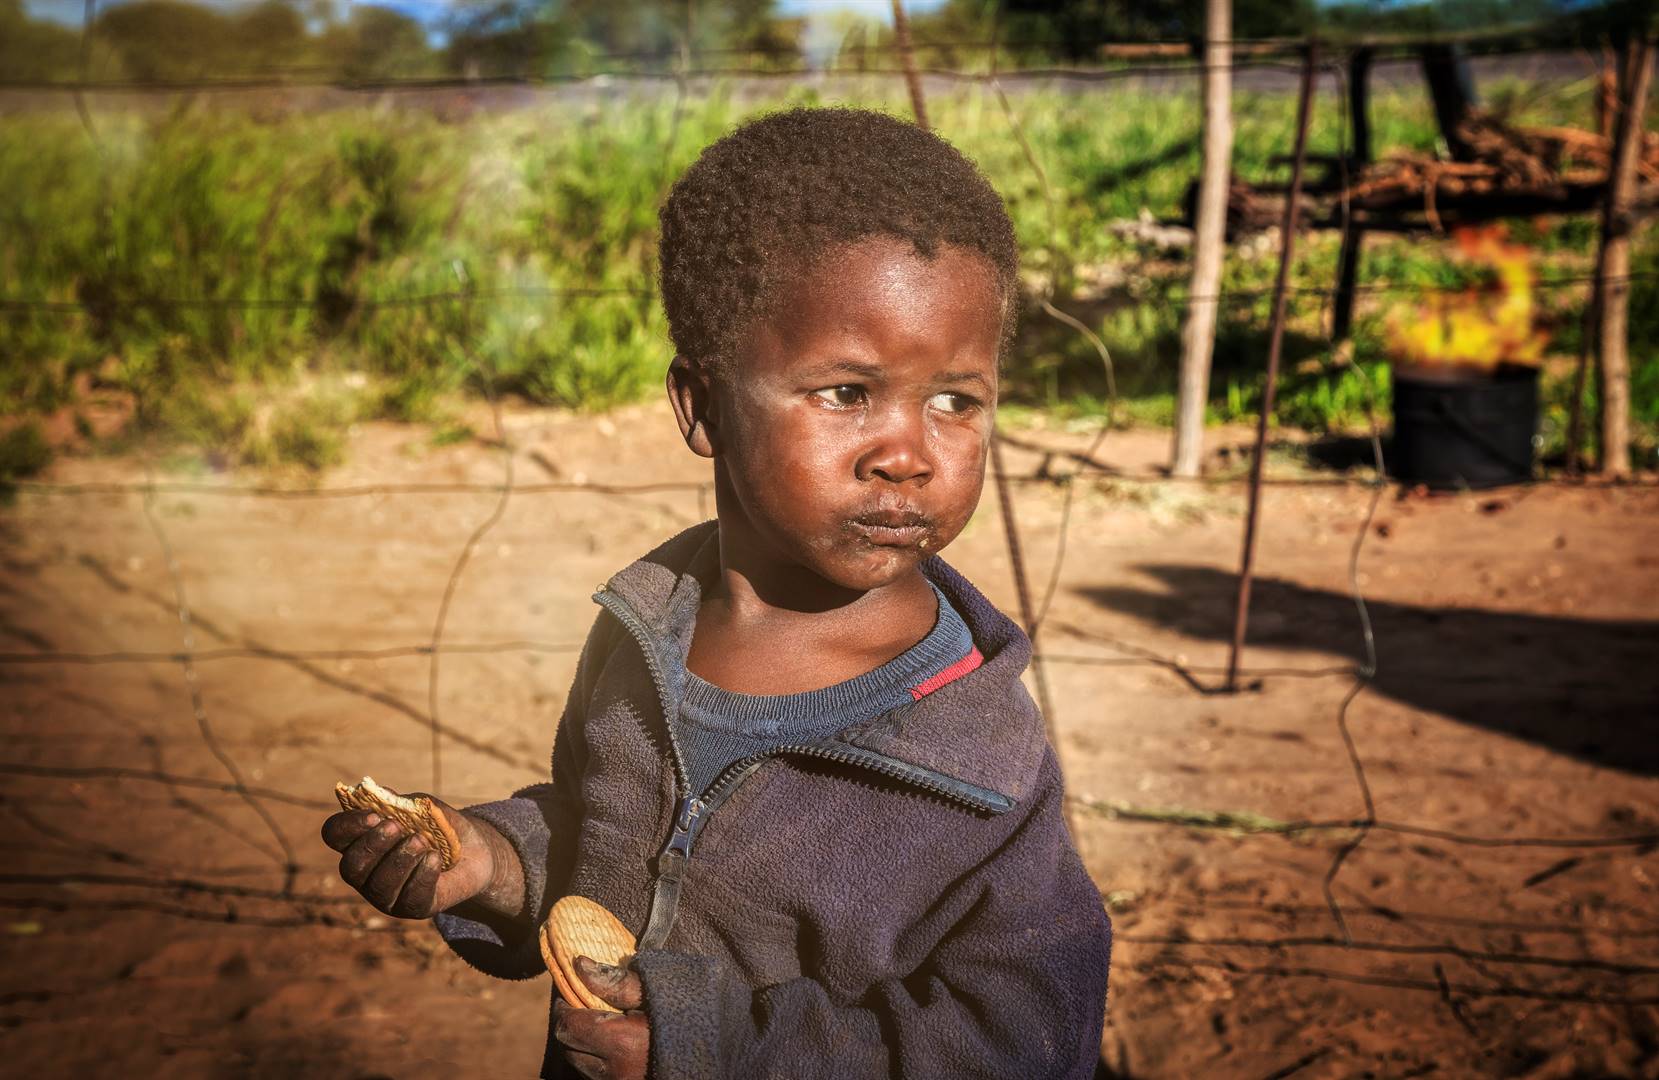 From an income perspective, 51% of children live in money-metric poverty, surviving on less than R647 per person per month.